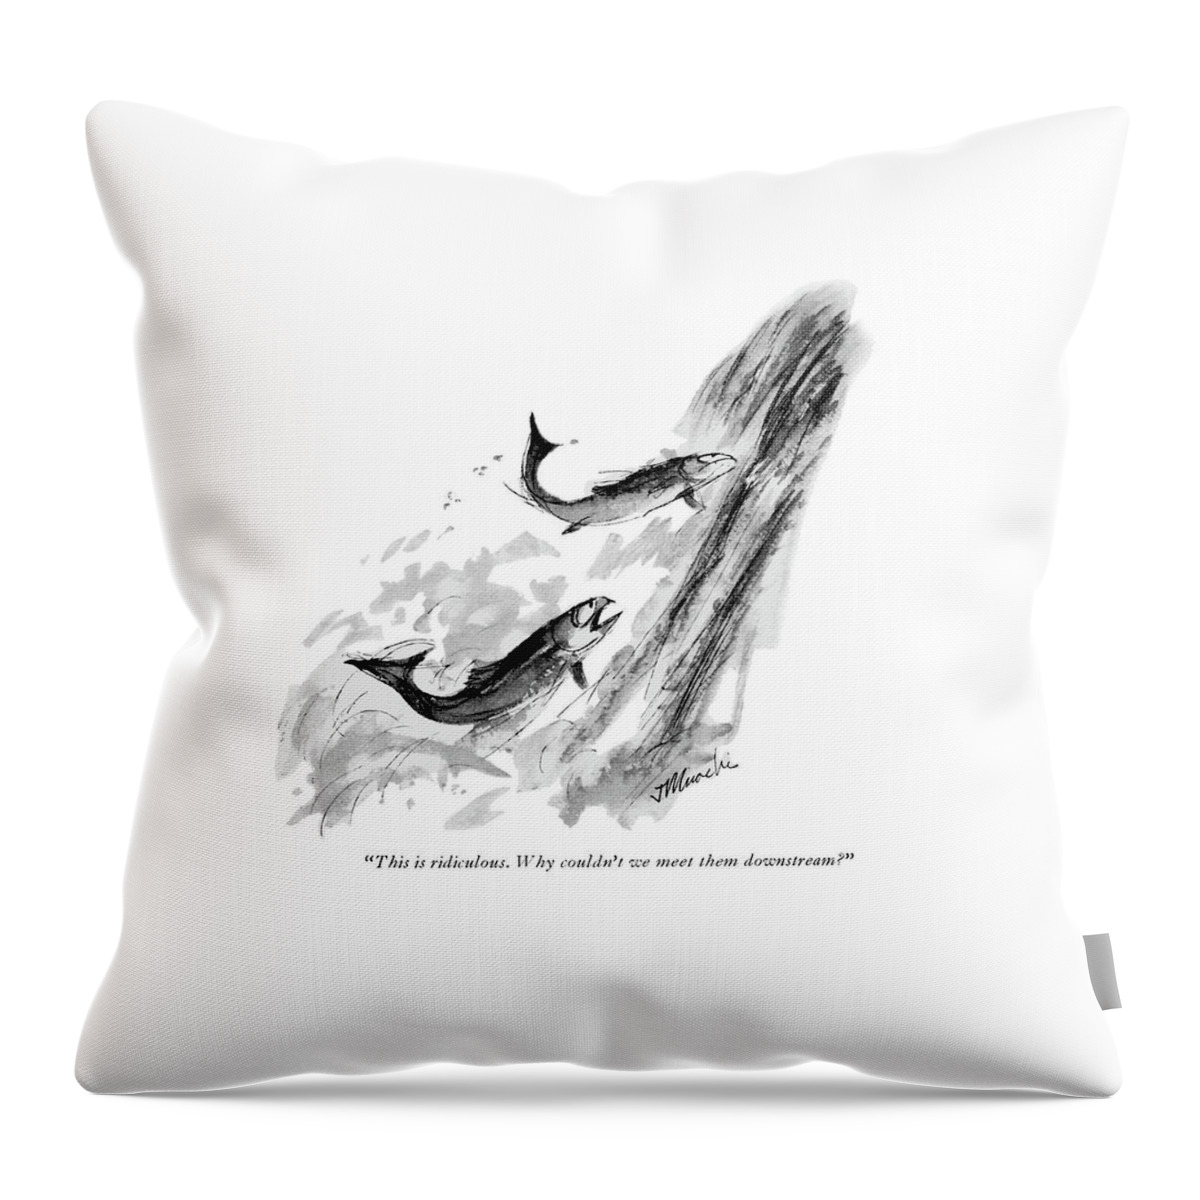 Why Couldn't We Meet Them Downstream? Throw Pillow